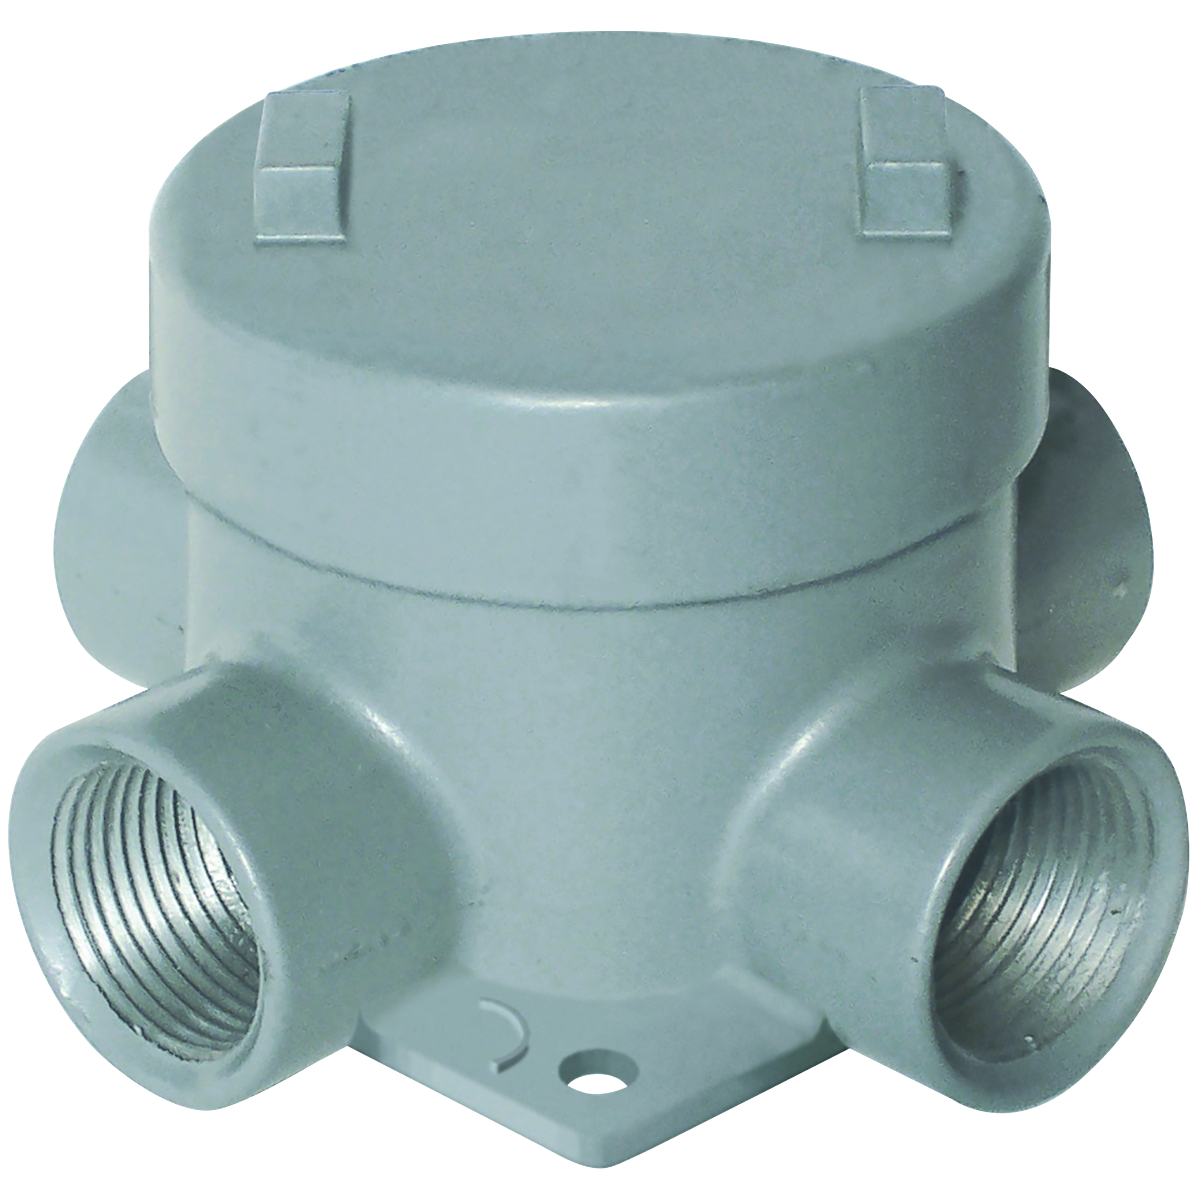 GEB SERIES - ALUMINUM OUTLET BODY - X TYPE - HUB SIZE 1-1/4 INCH -VOLUME 29.0 CUBIC INCHES